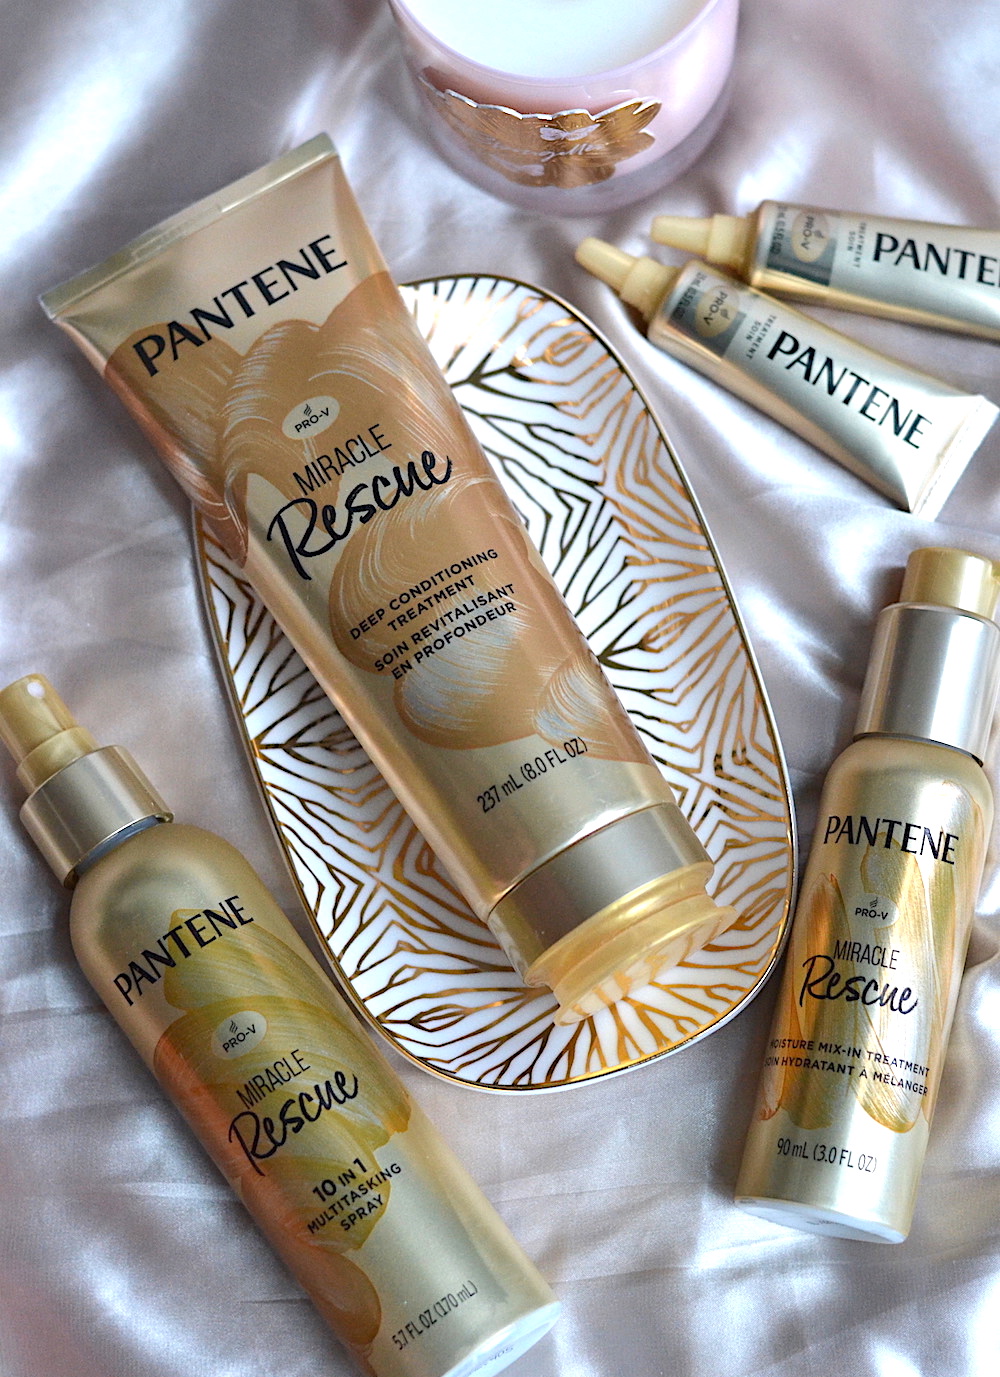 Pantene Miracle Rescue collection